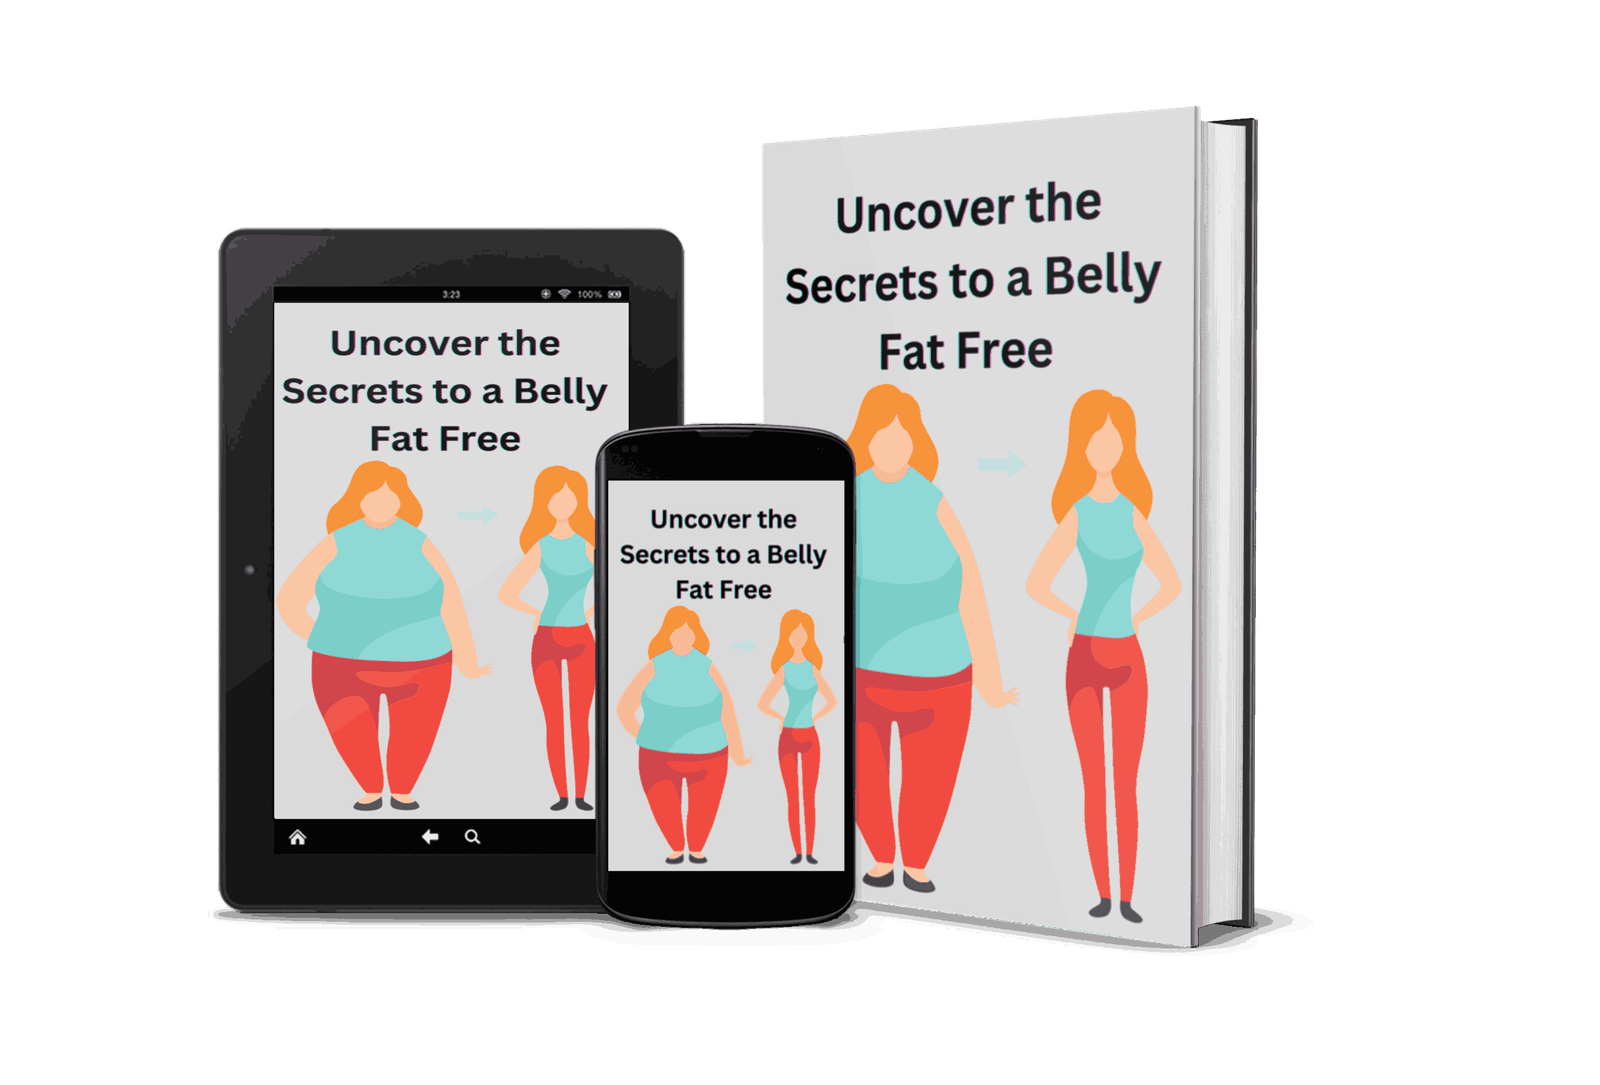 Uncover the Secrets to a Belly Fat Free